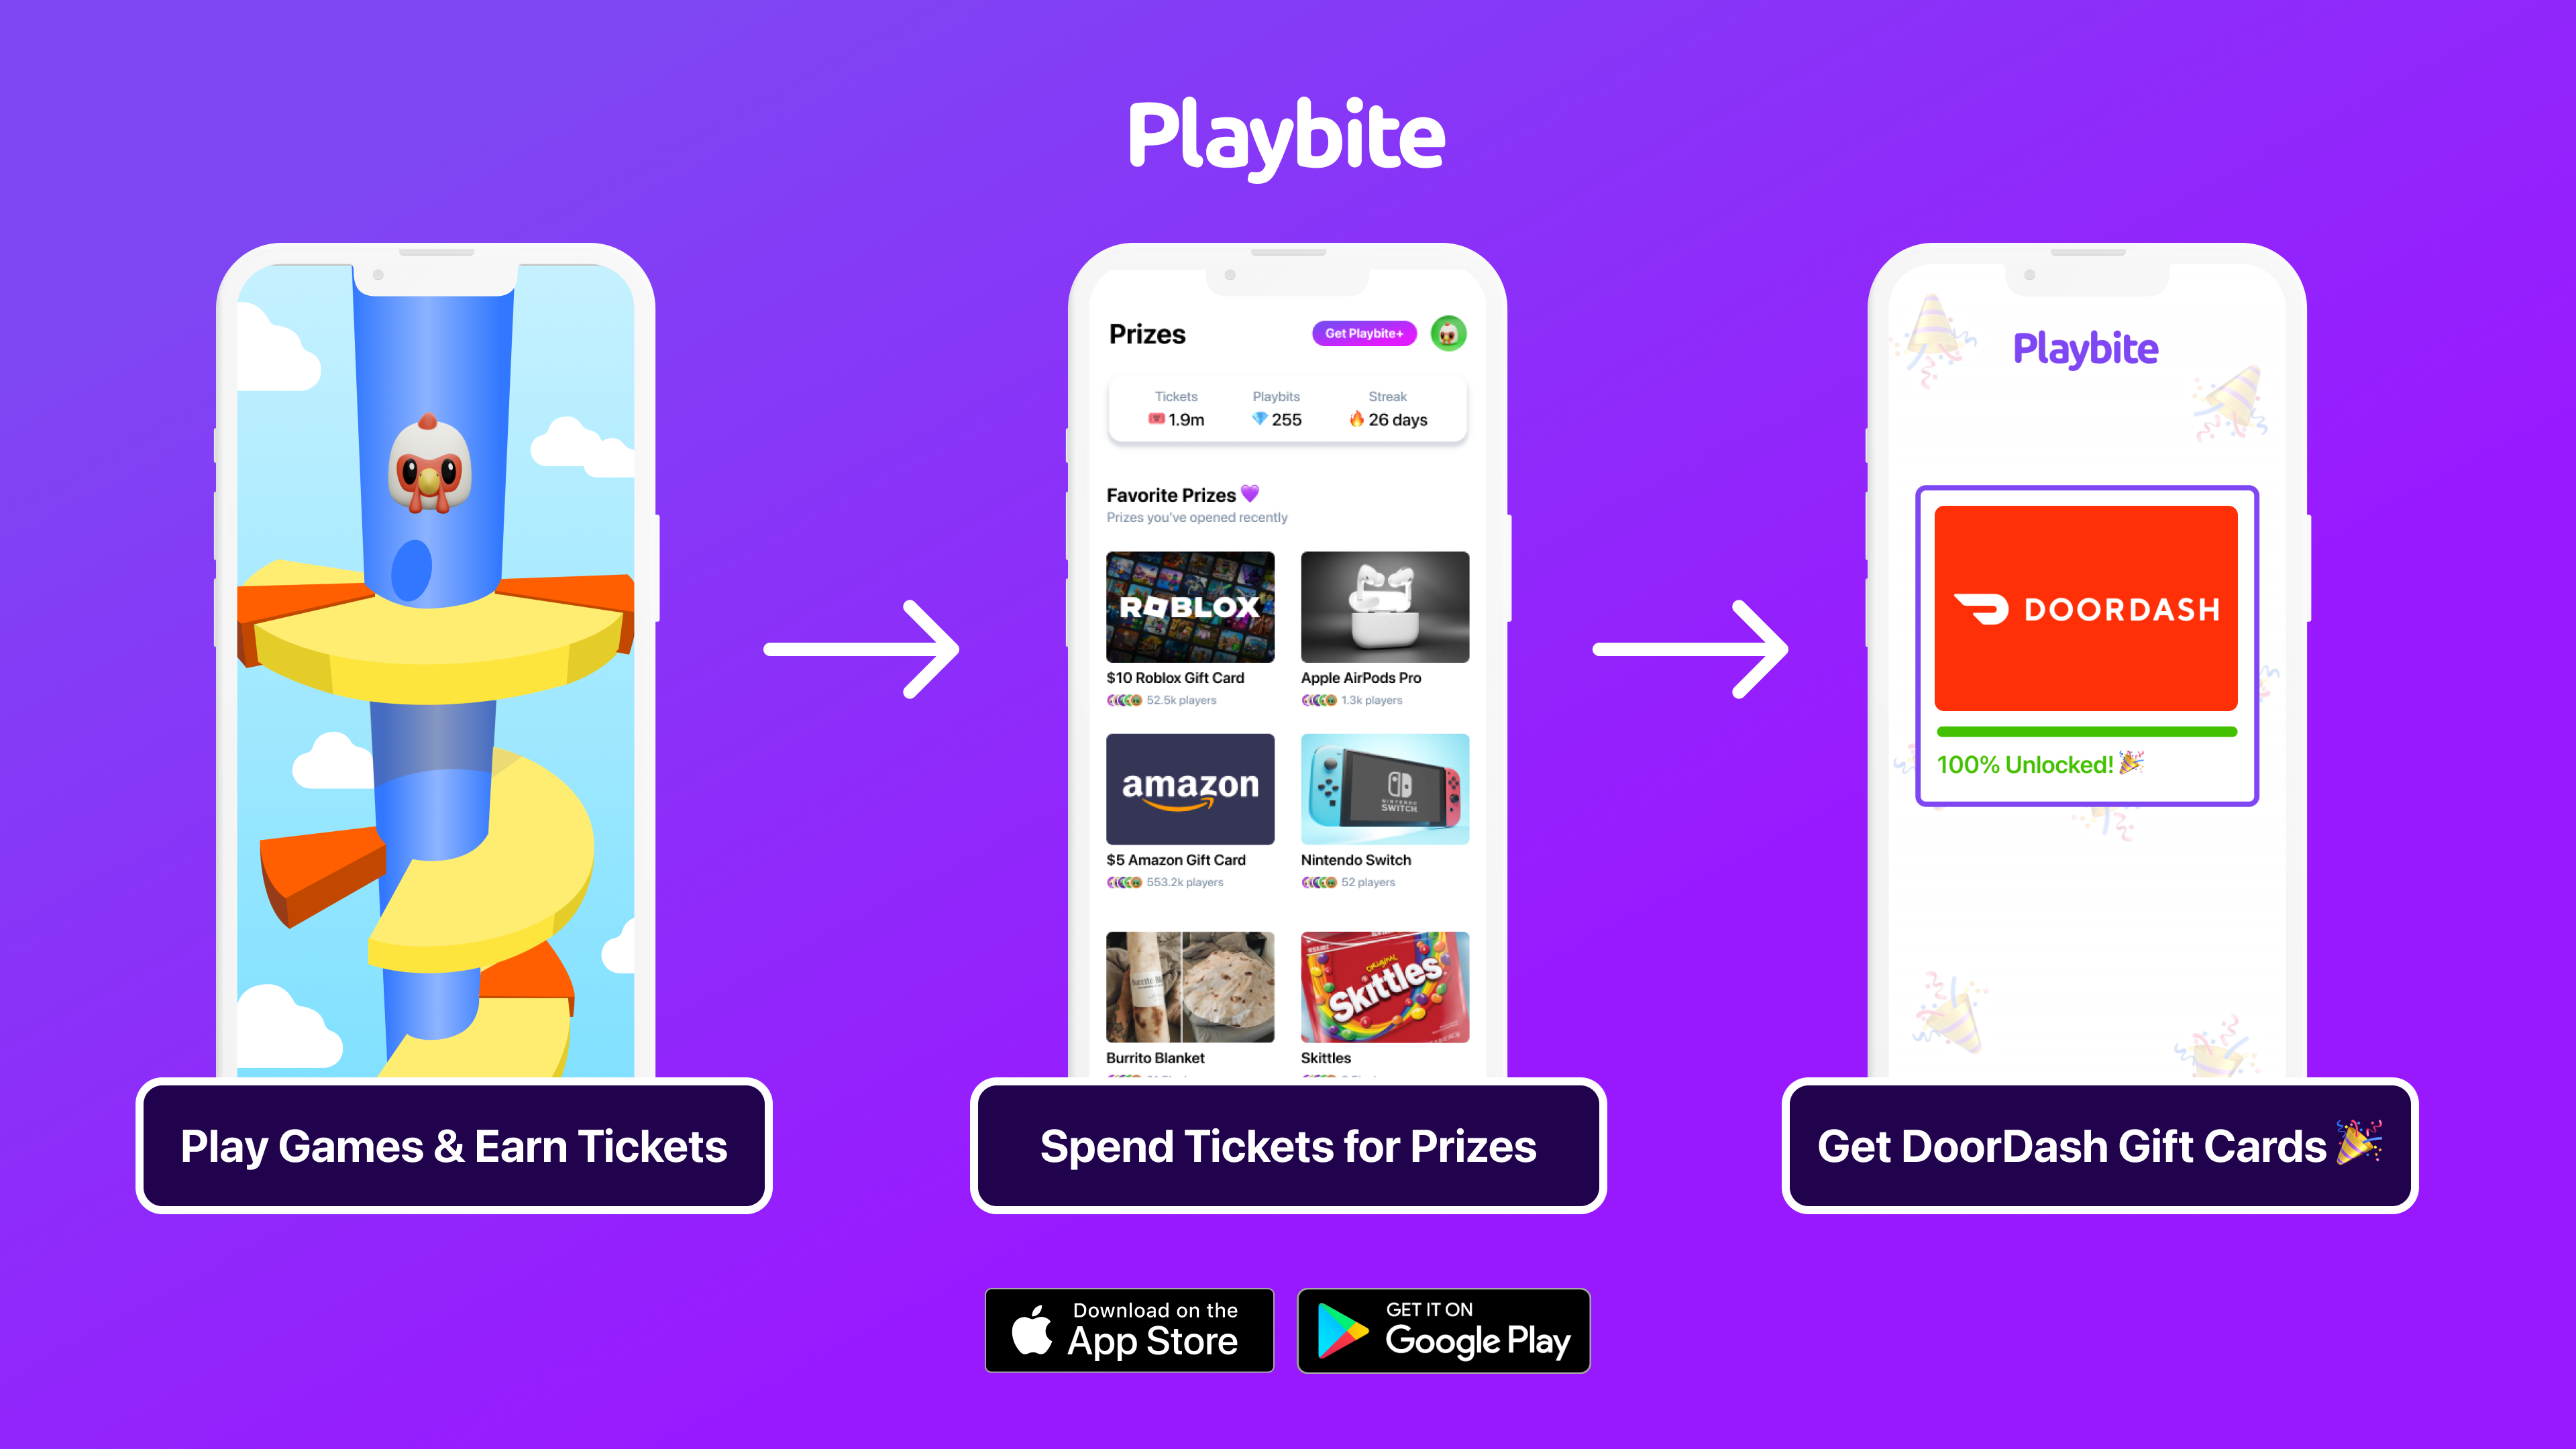 Win official DoorDash gift cards by playing games on Playbite!